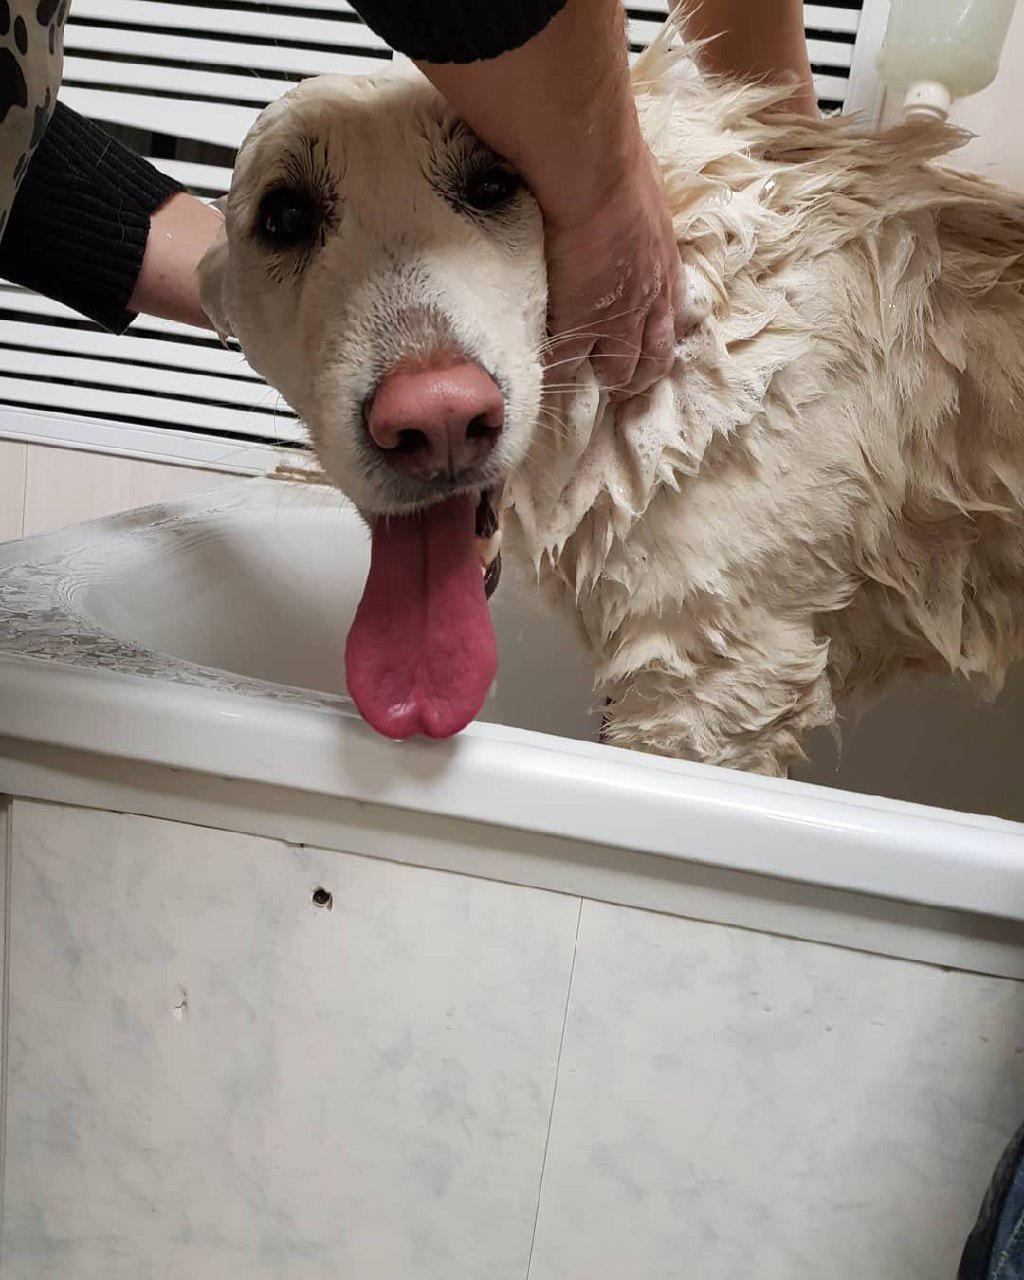 A Swiss Shepherd standing inside the bathtub while being washed